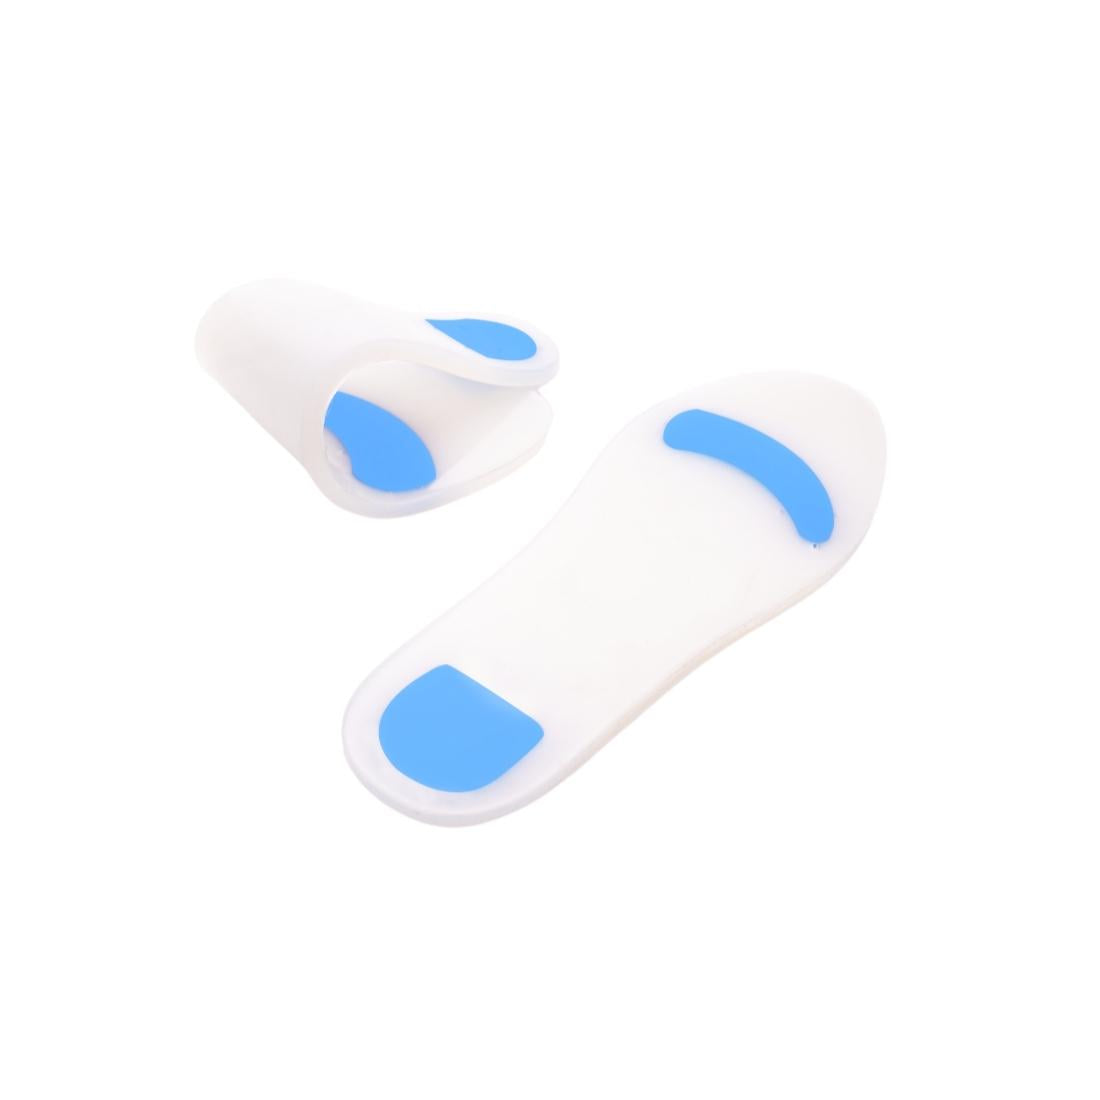 Nuanchu Silicone Arch Orthotic Shoe Insole Price in India - Buy Nuanchu  Silicone Arch Orthotic Shoe Insole online at